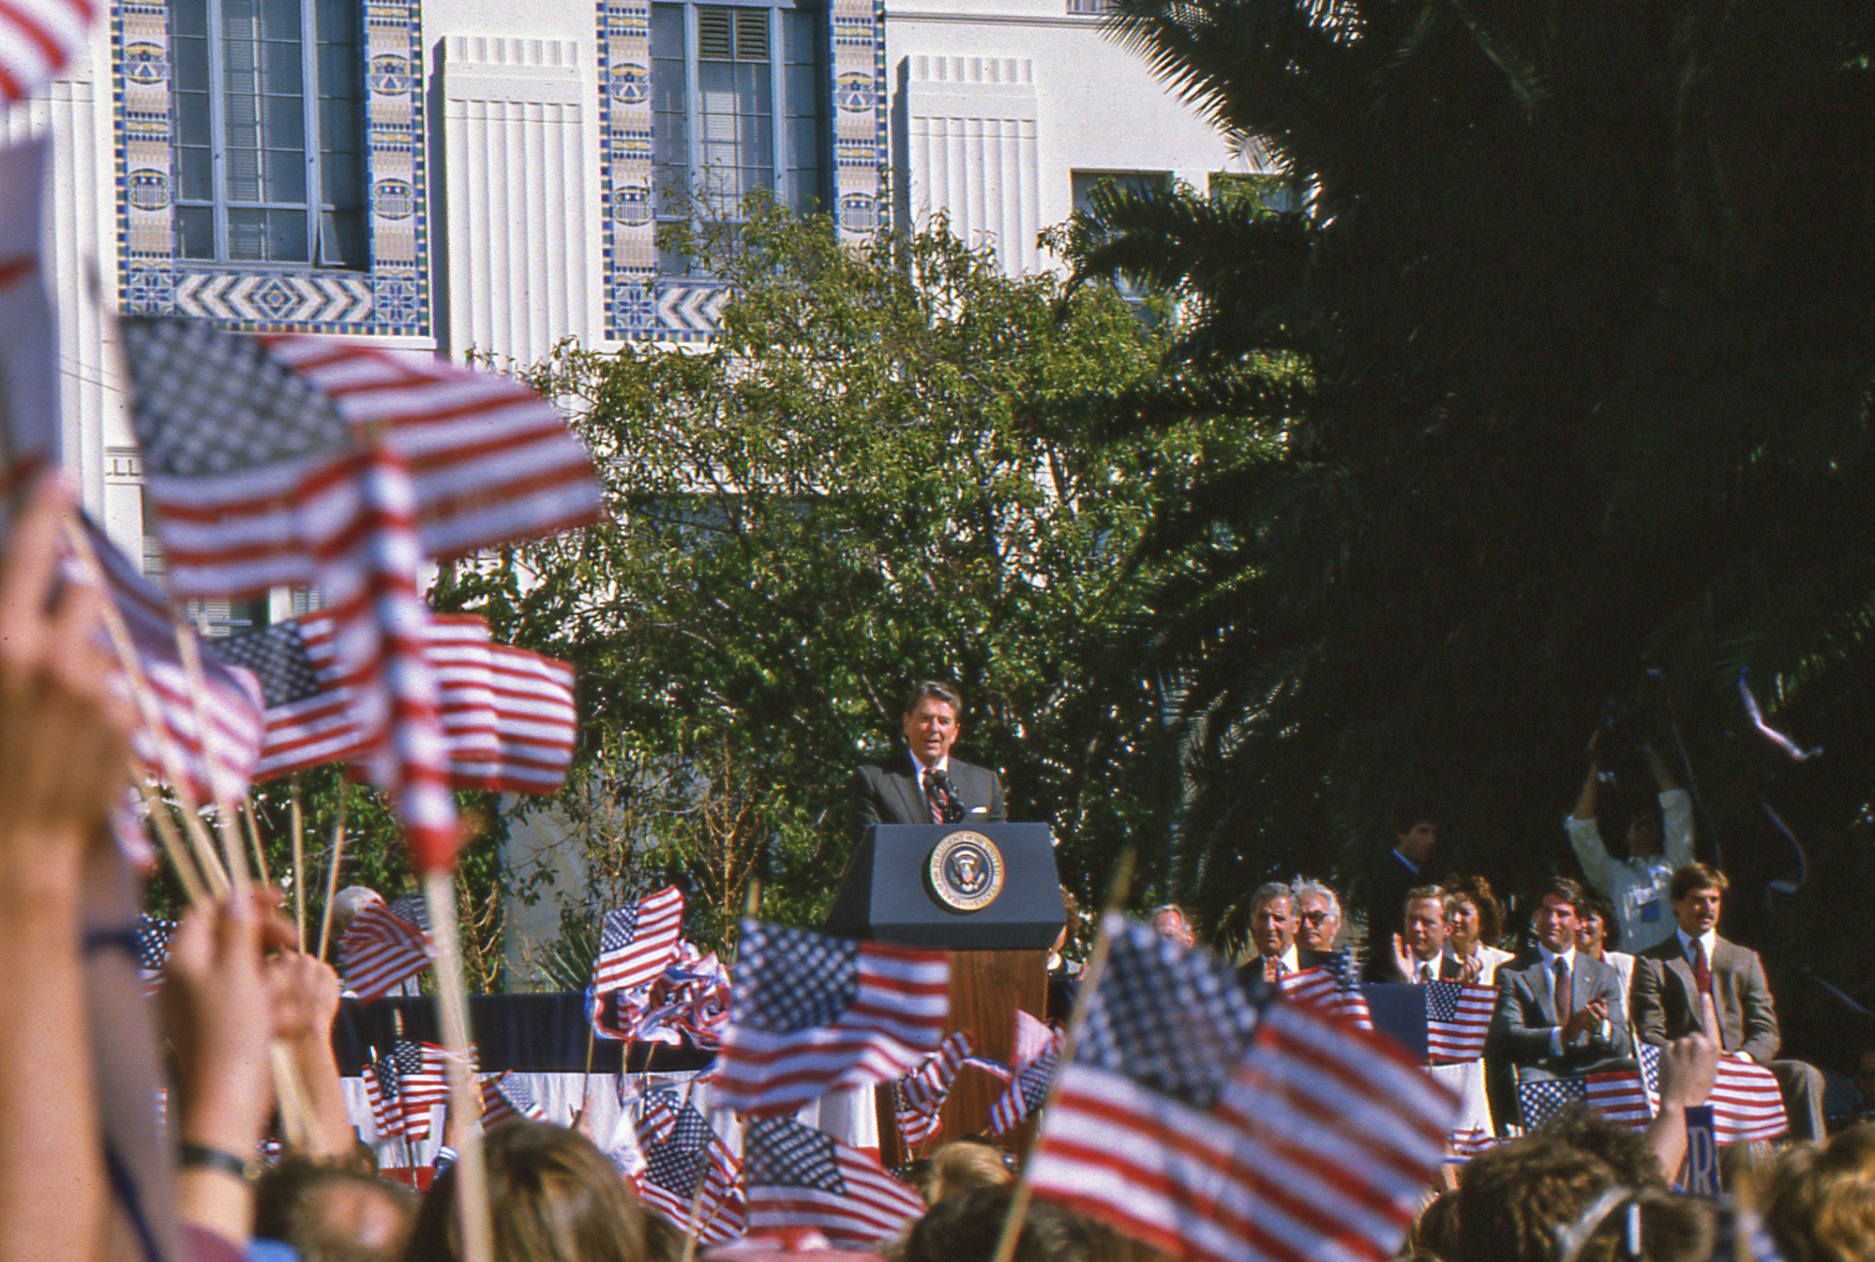 San Diego, CA, USA - October, 22, 1984; President Ronald Reagan giving a speech at a campaign rally at the San Diego County Administration building.